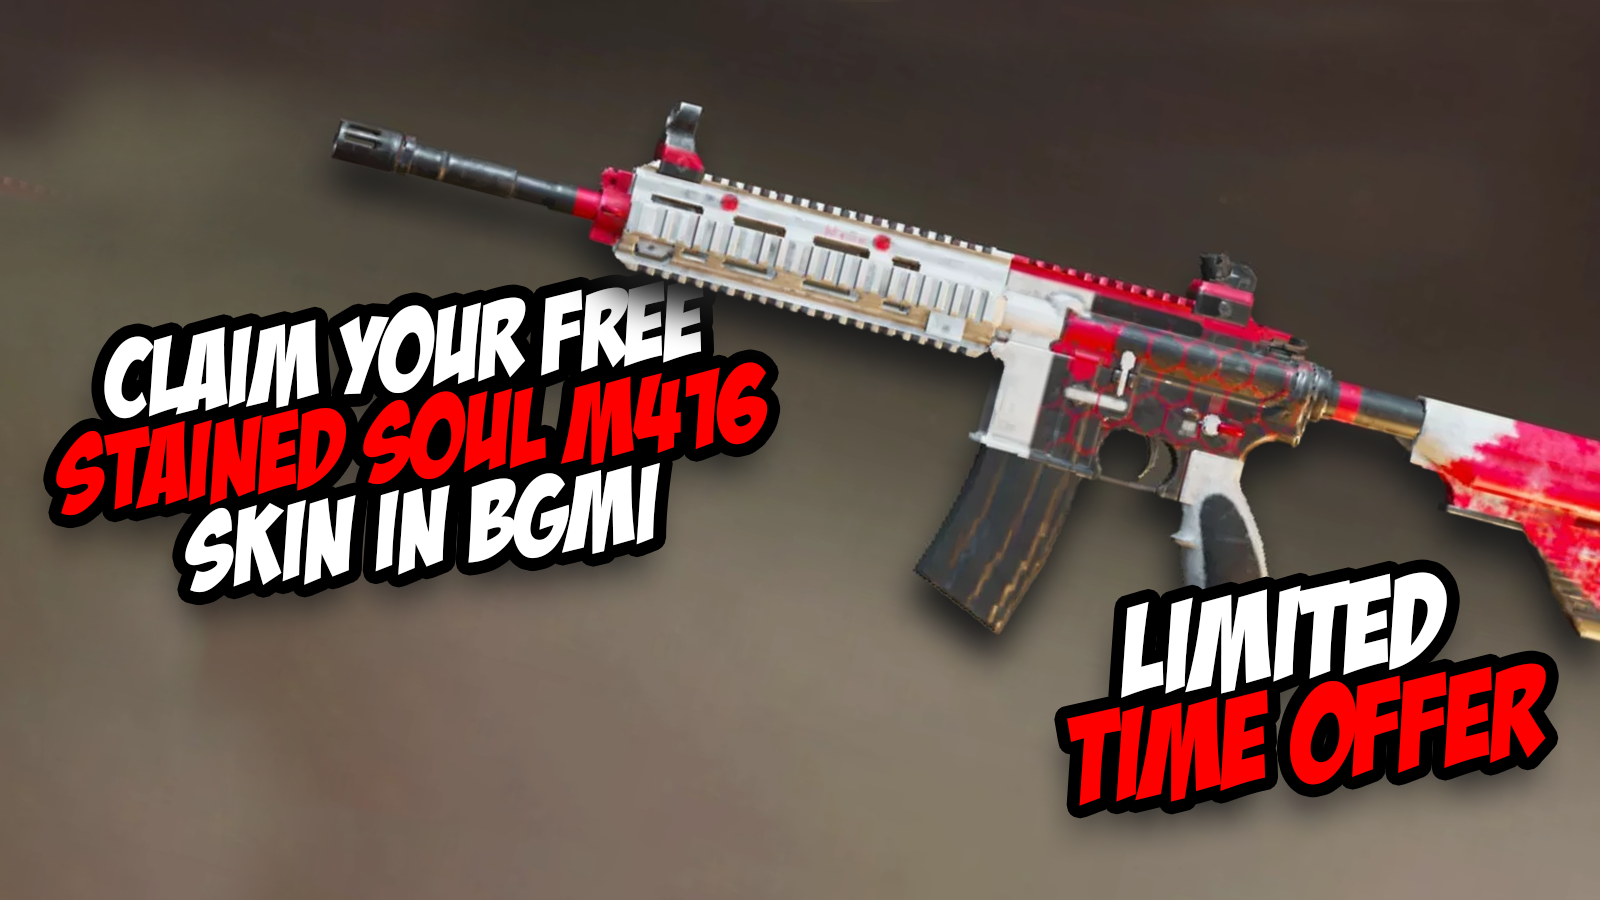 Claim Your FREE Stained Soul M416 Skin in BGMI – Limited Time Offer!